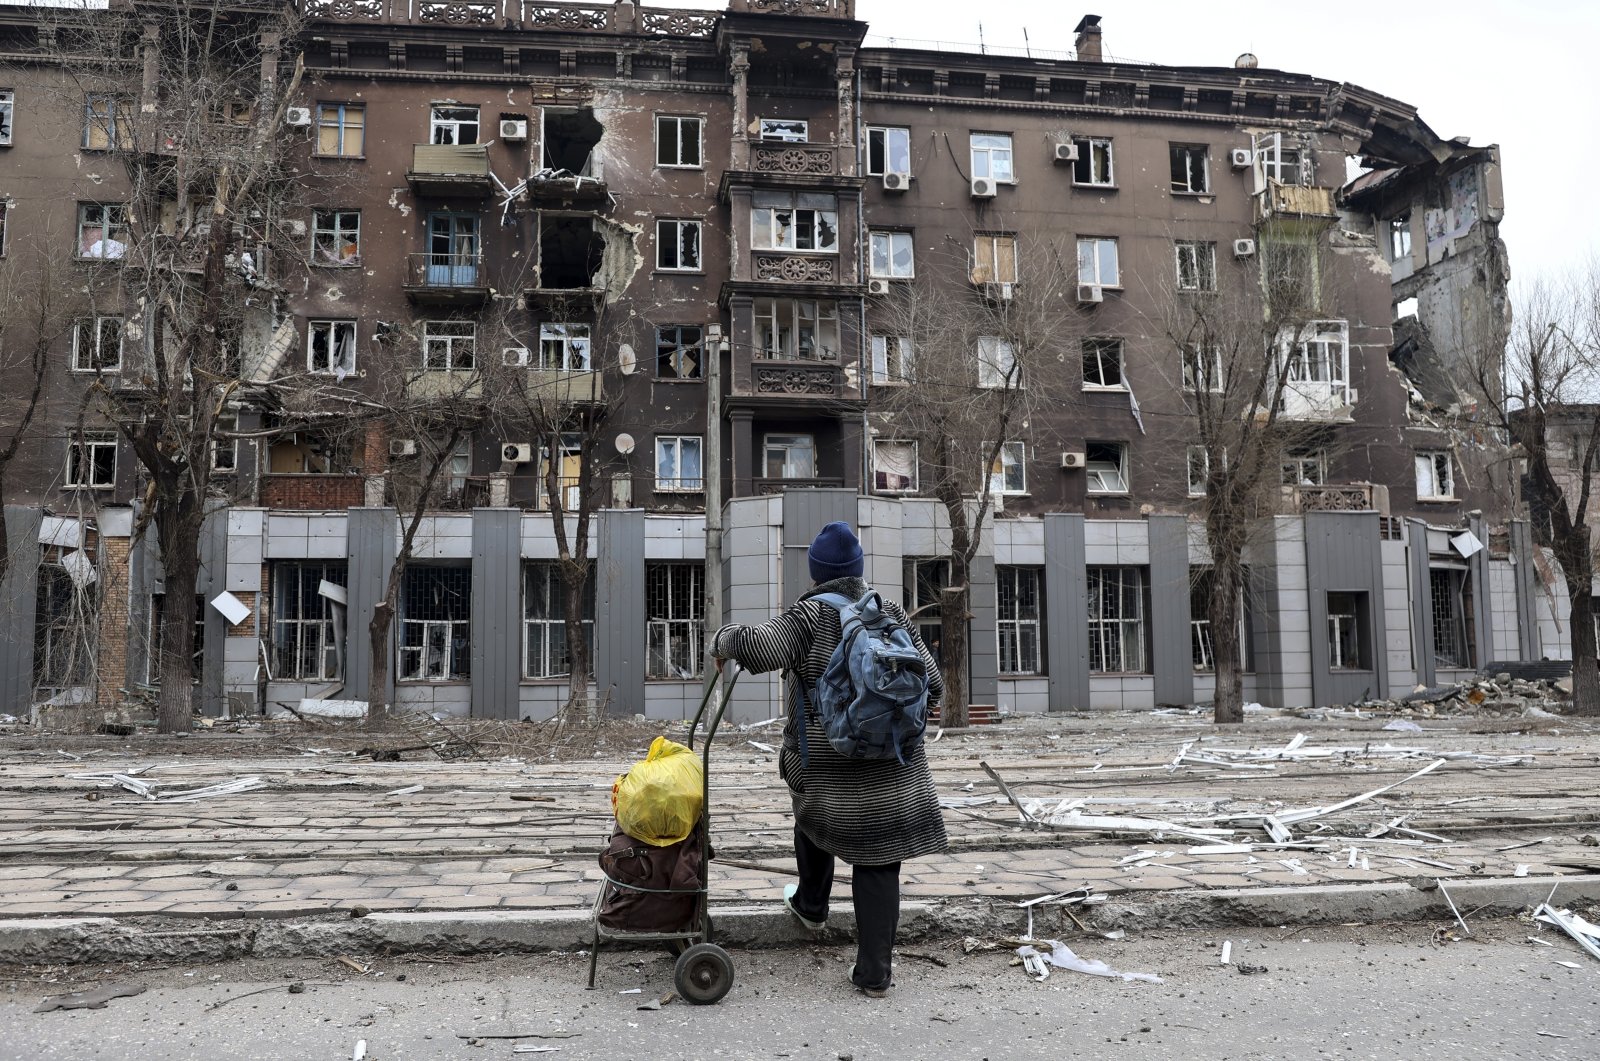 A local resident looks at damage during heavy fighting near the Illich Iron & Steel Works Metallurgical Plant, in an area controlled by Russian-backed separatist forces in Mariupol, Ukraine, April 16, 2022. (AP Photo)